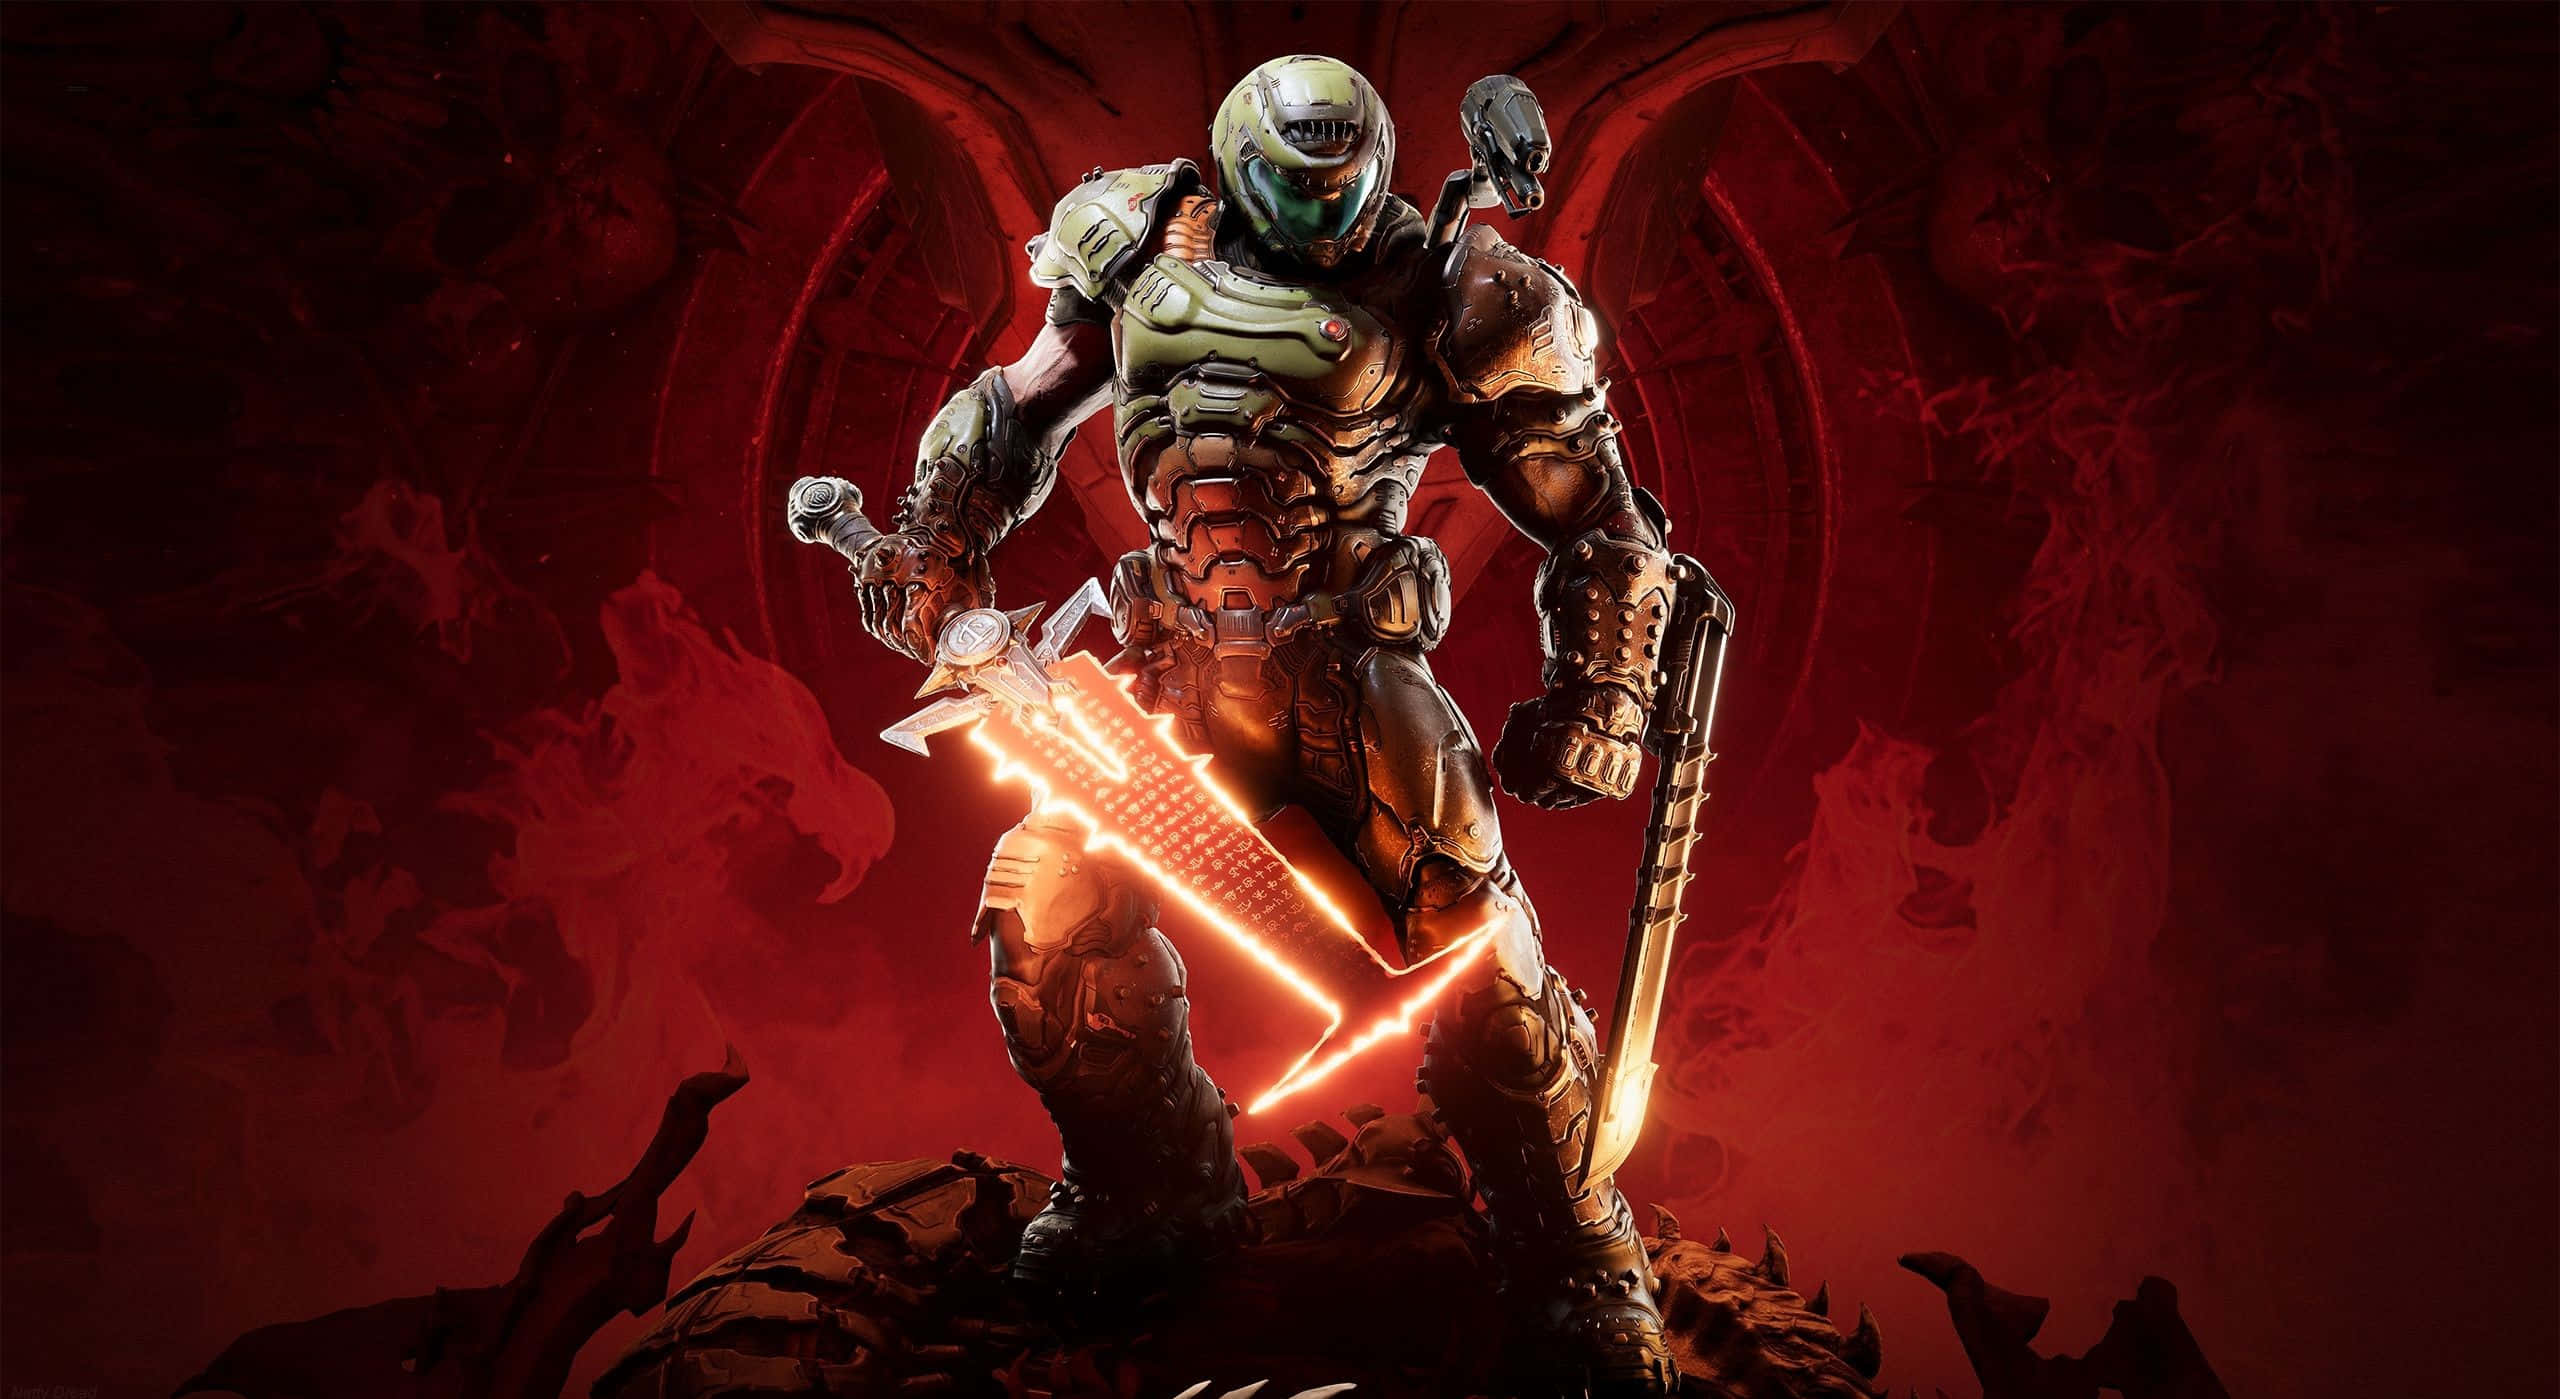 The Enraged Doom Slayer Confronts the Forces of Hell in Doom Eternal